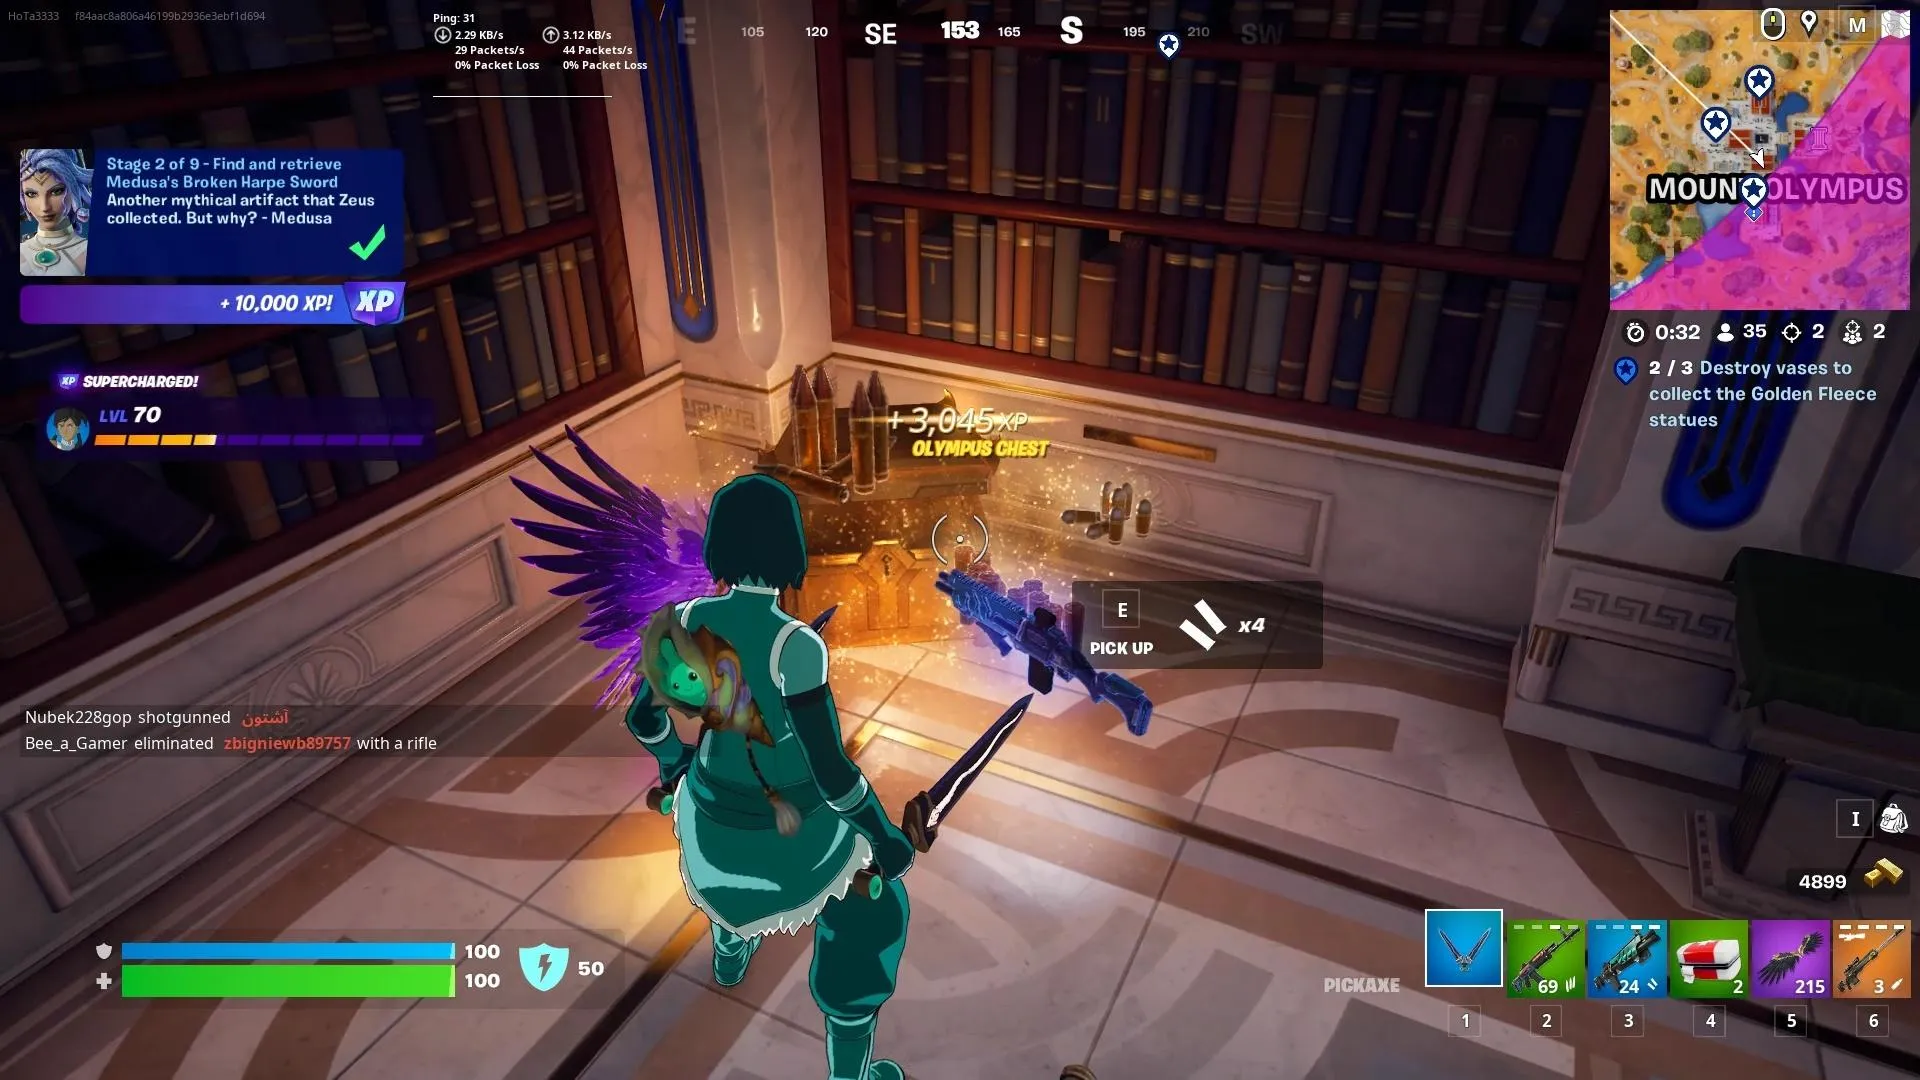 What are Olympus Chests in Fortnite?